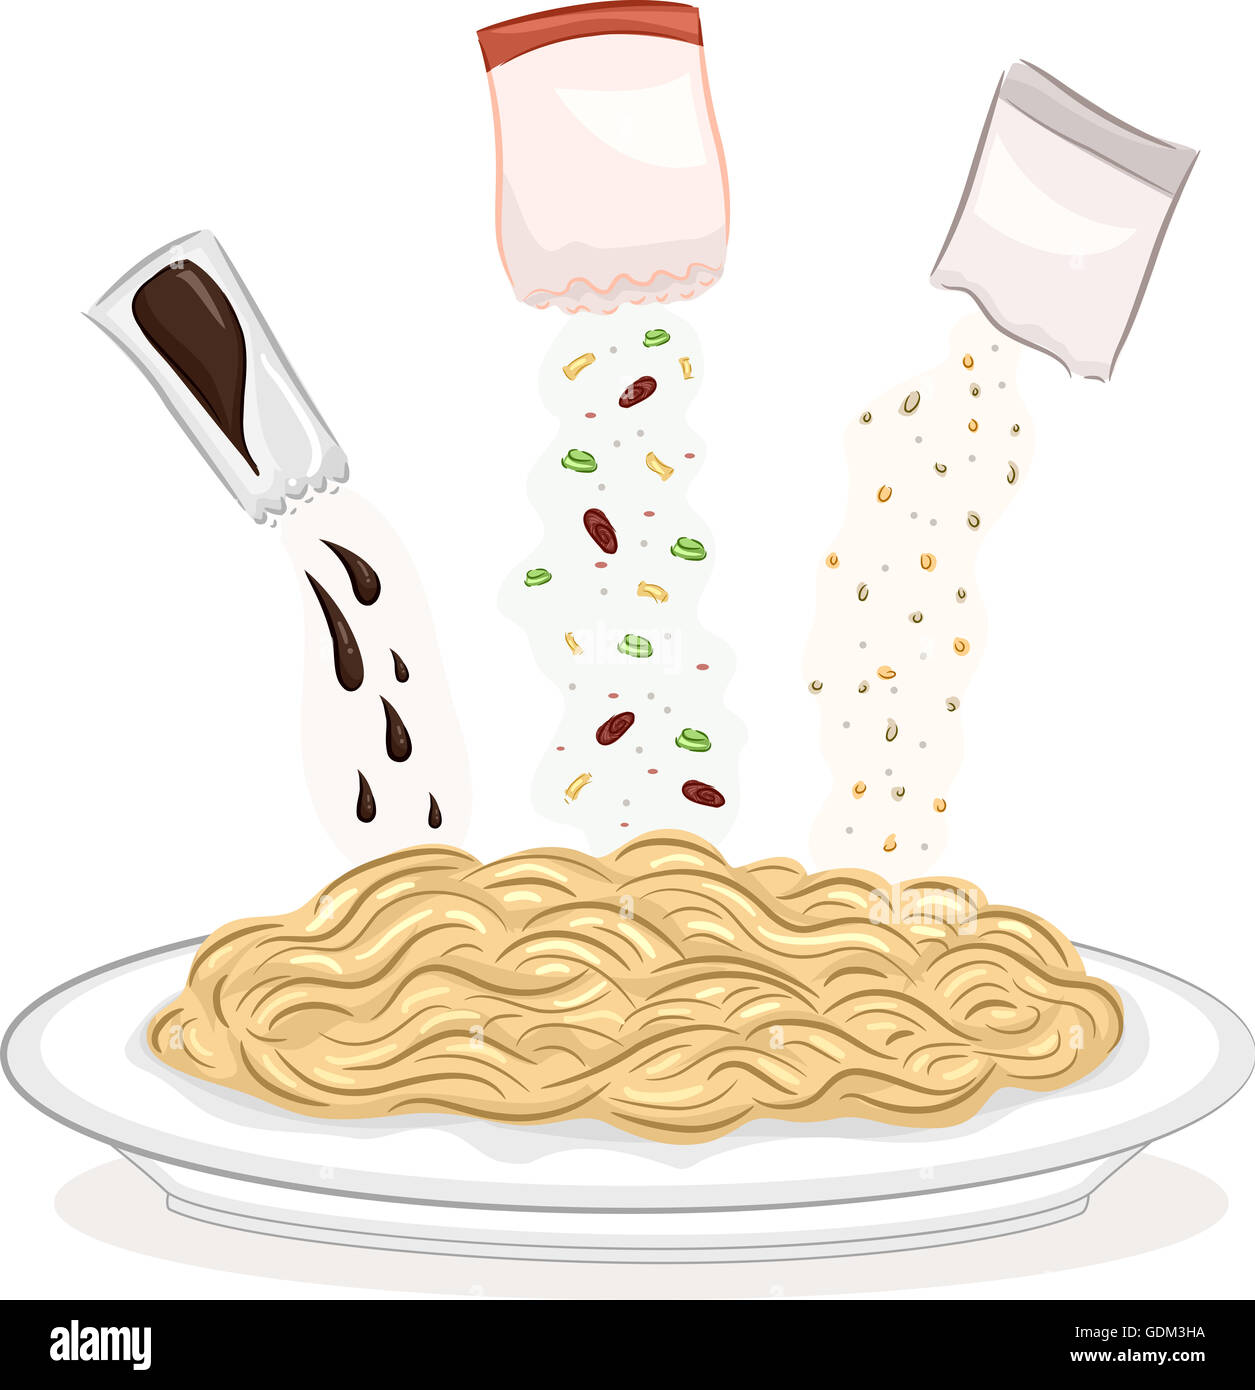 Illustration of a Plate of Instant Noodles With Different Seasonings Hovering Above It Stock Photo